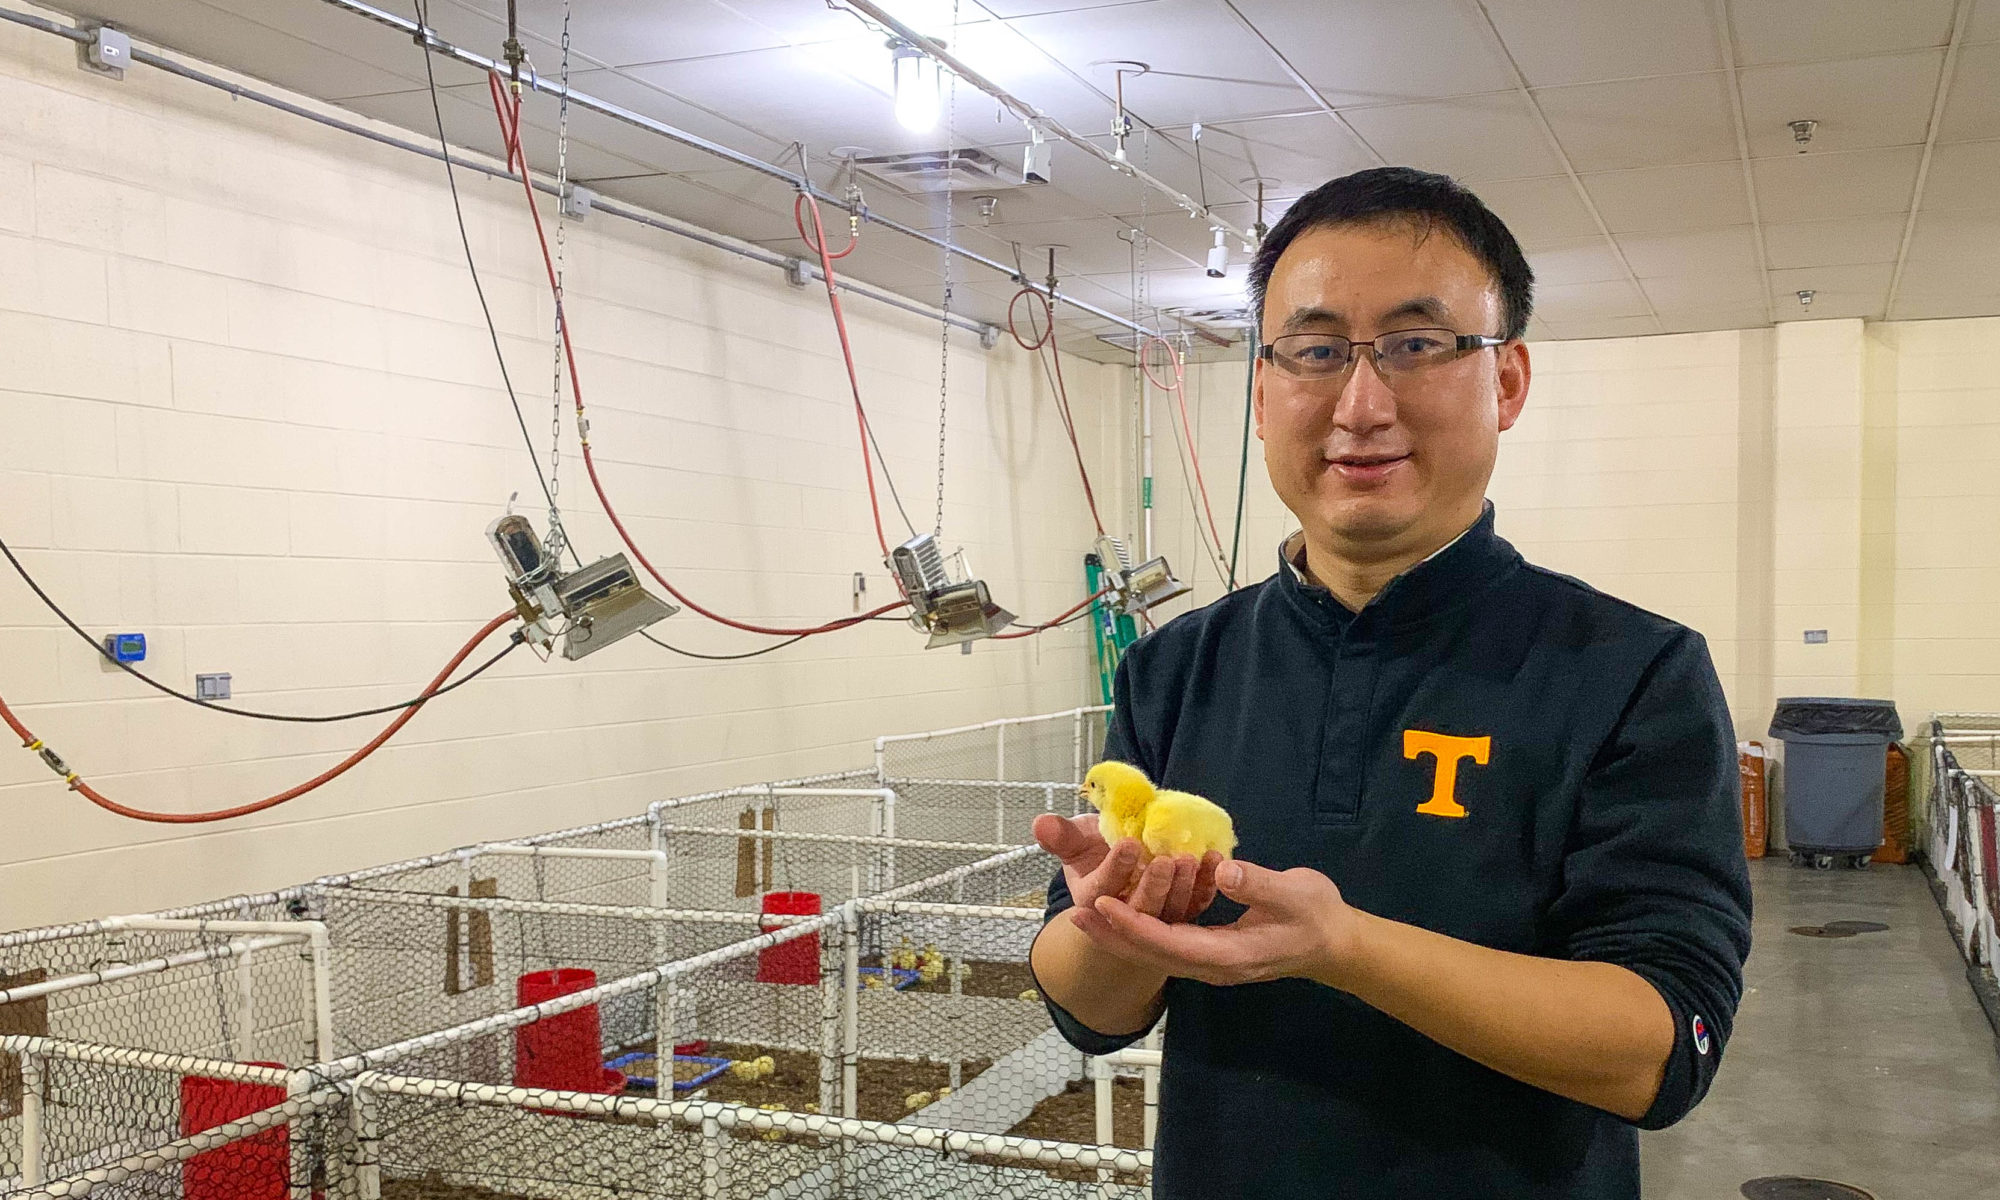 Yang Zhao poses with chicken hatchling in his broiler lab